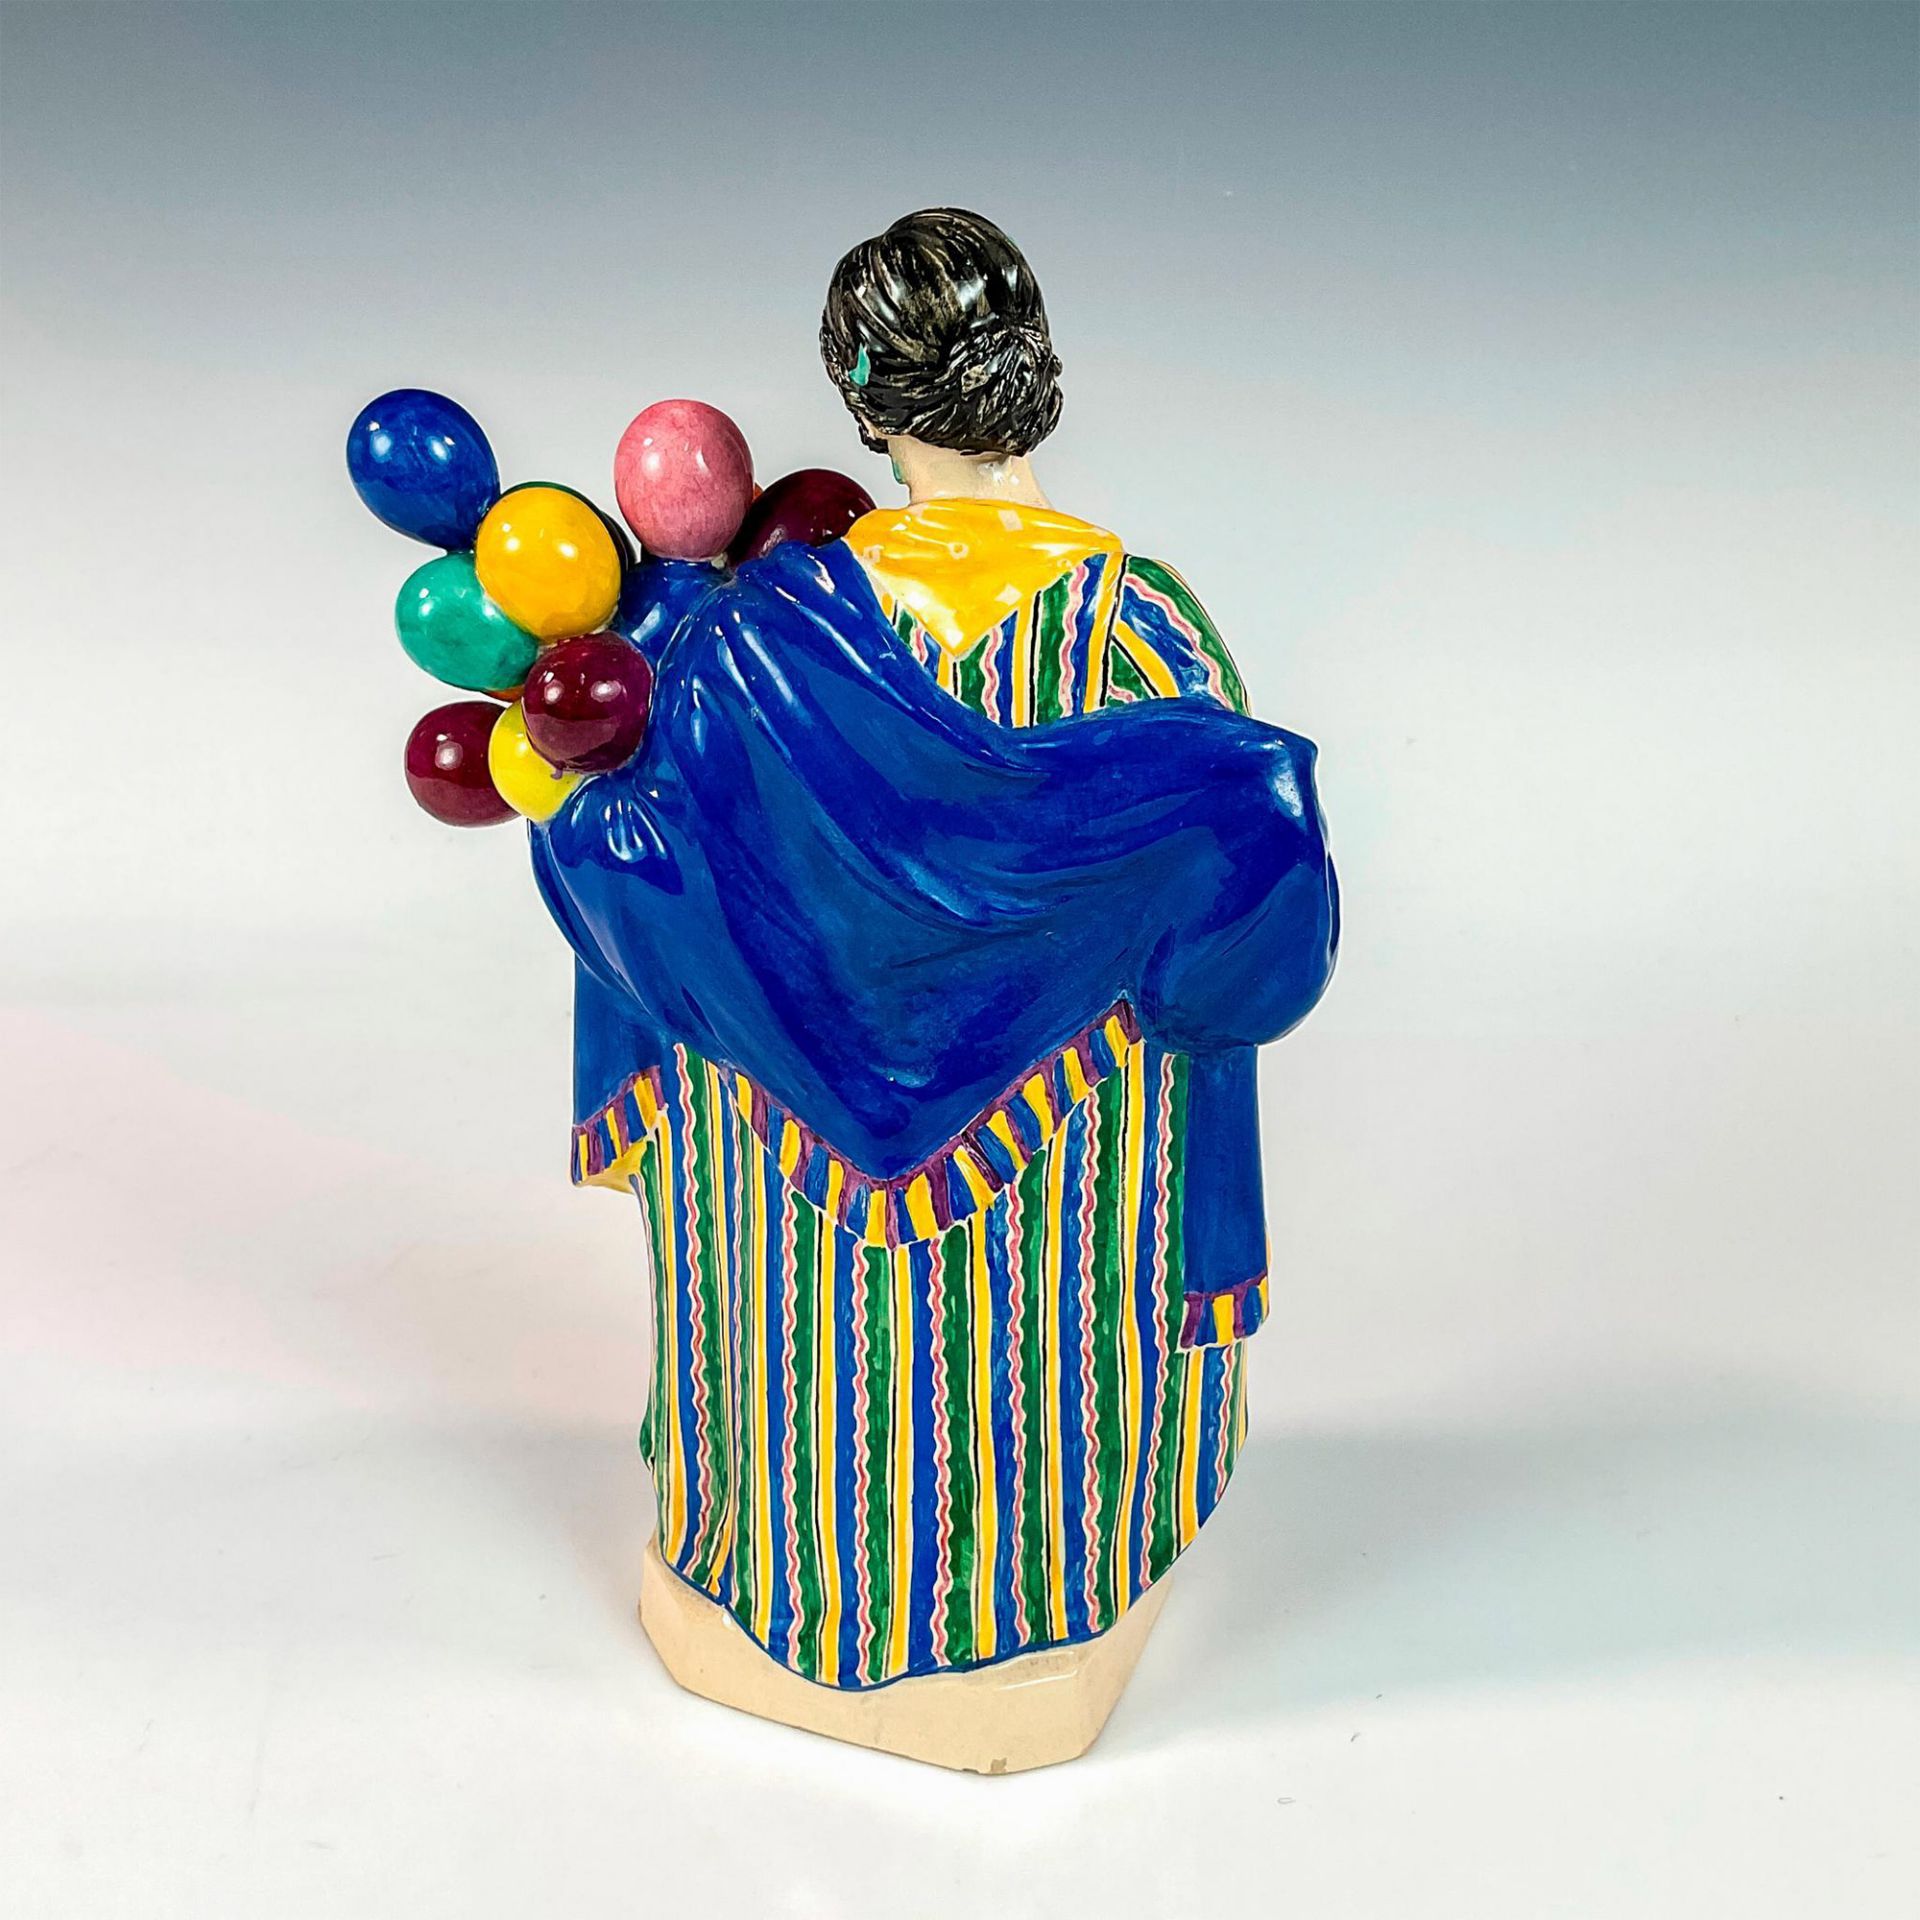 Charles Vyse Figure, The Balloon Woman - Image 3 of 4